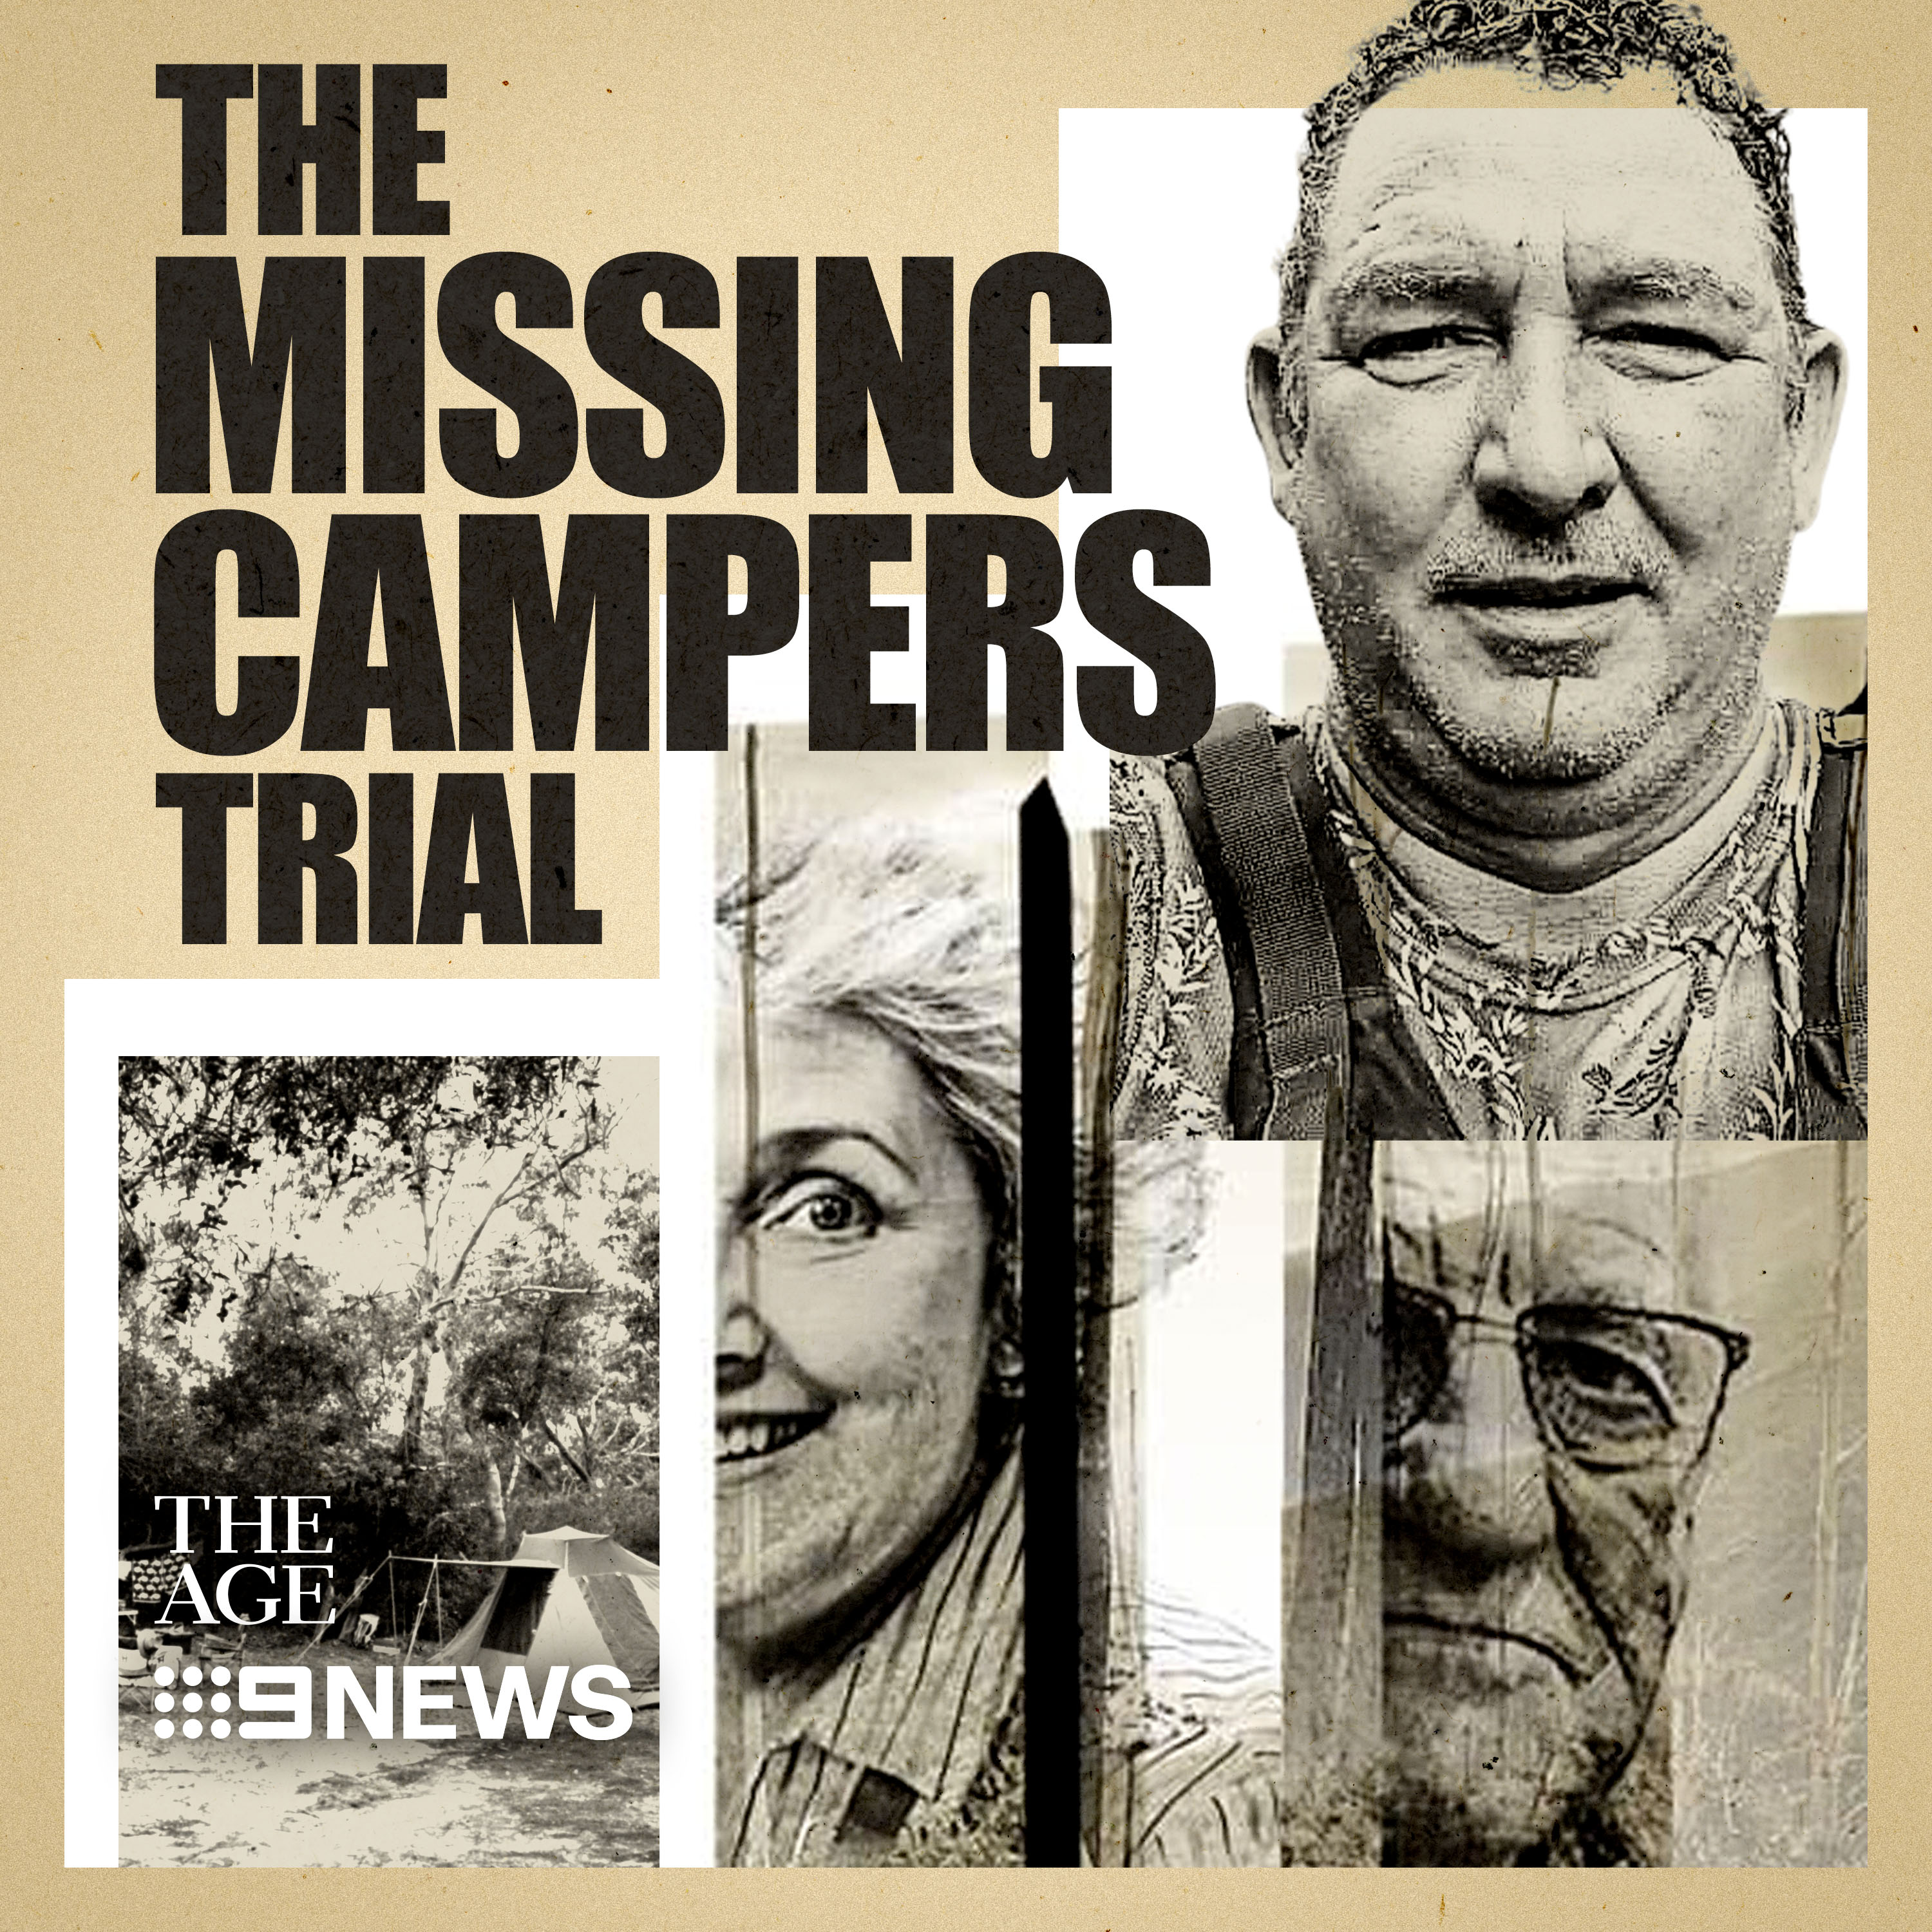 Listen to Sly on The Missing Campers Trial Podcast....